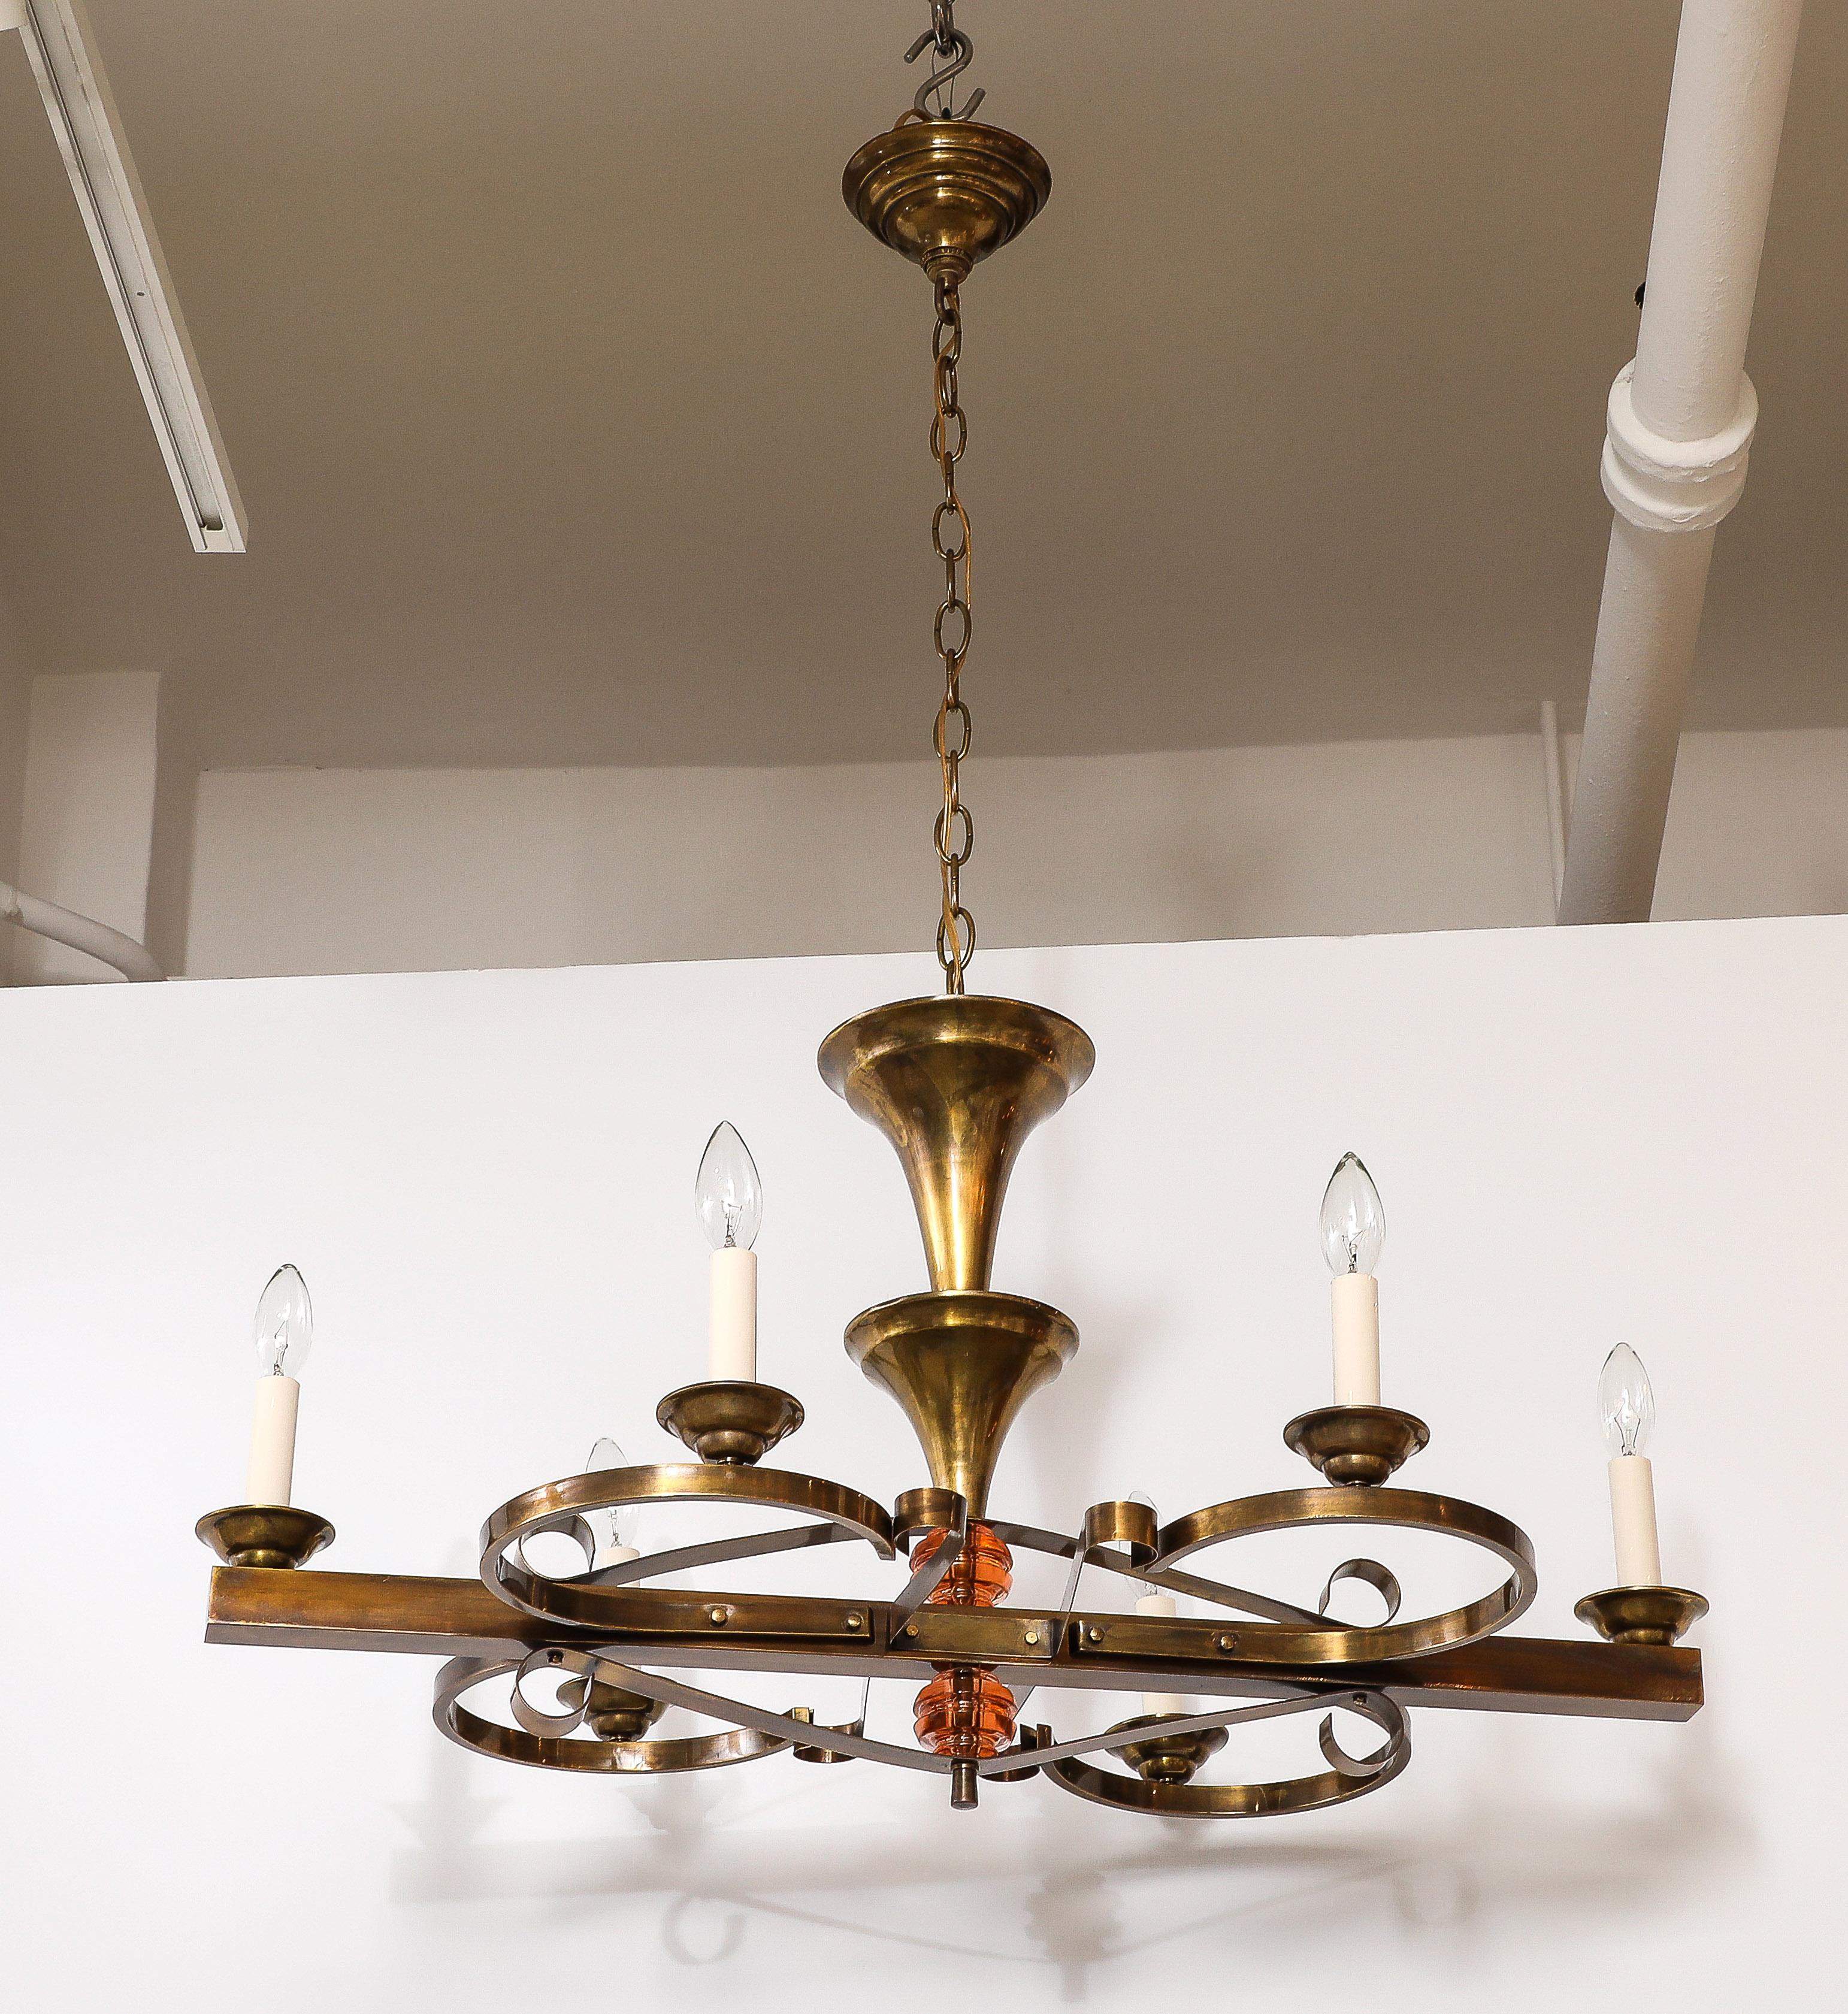 1940's French Art-Deco 6 Arm Brass Chandelier For Sale 2